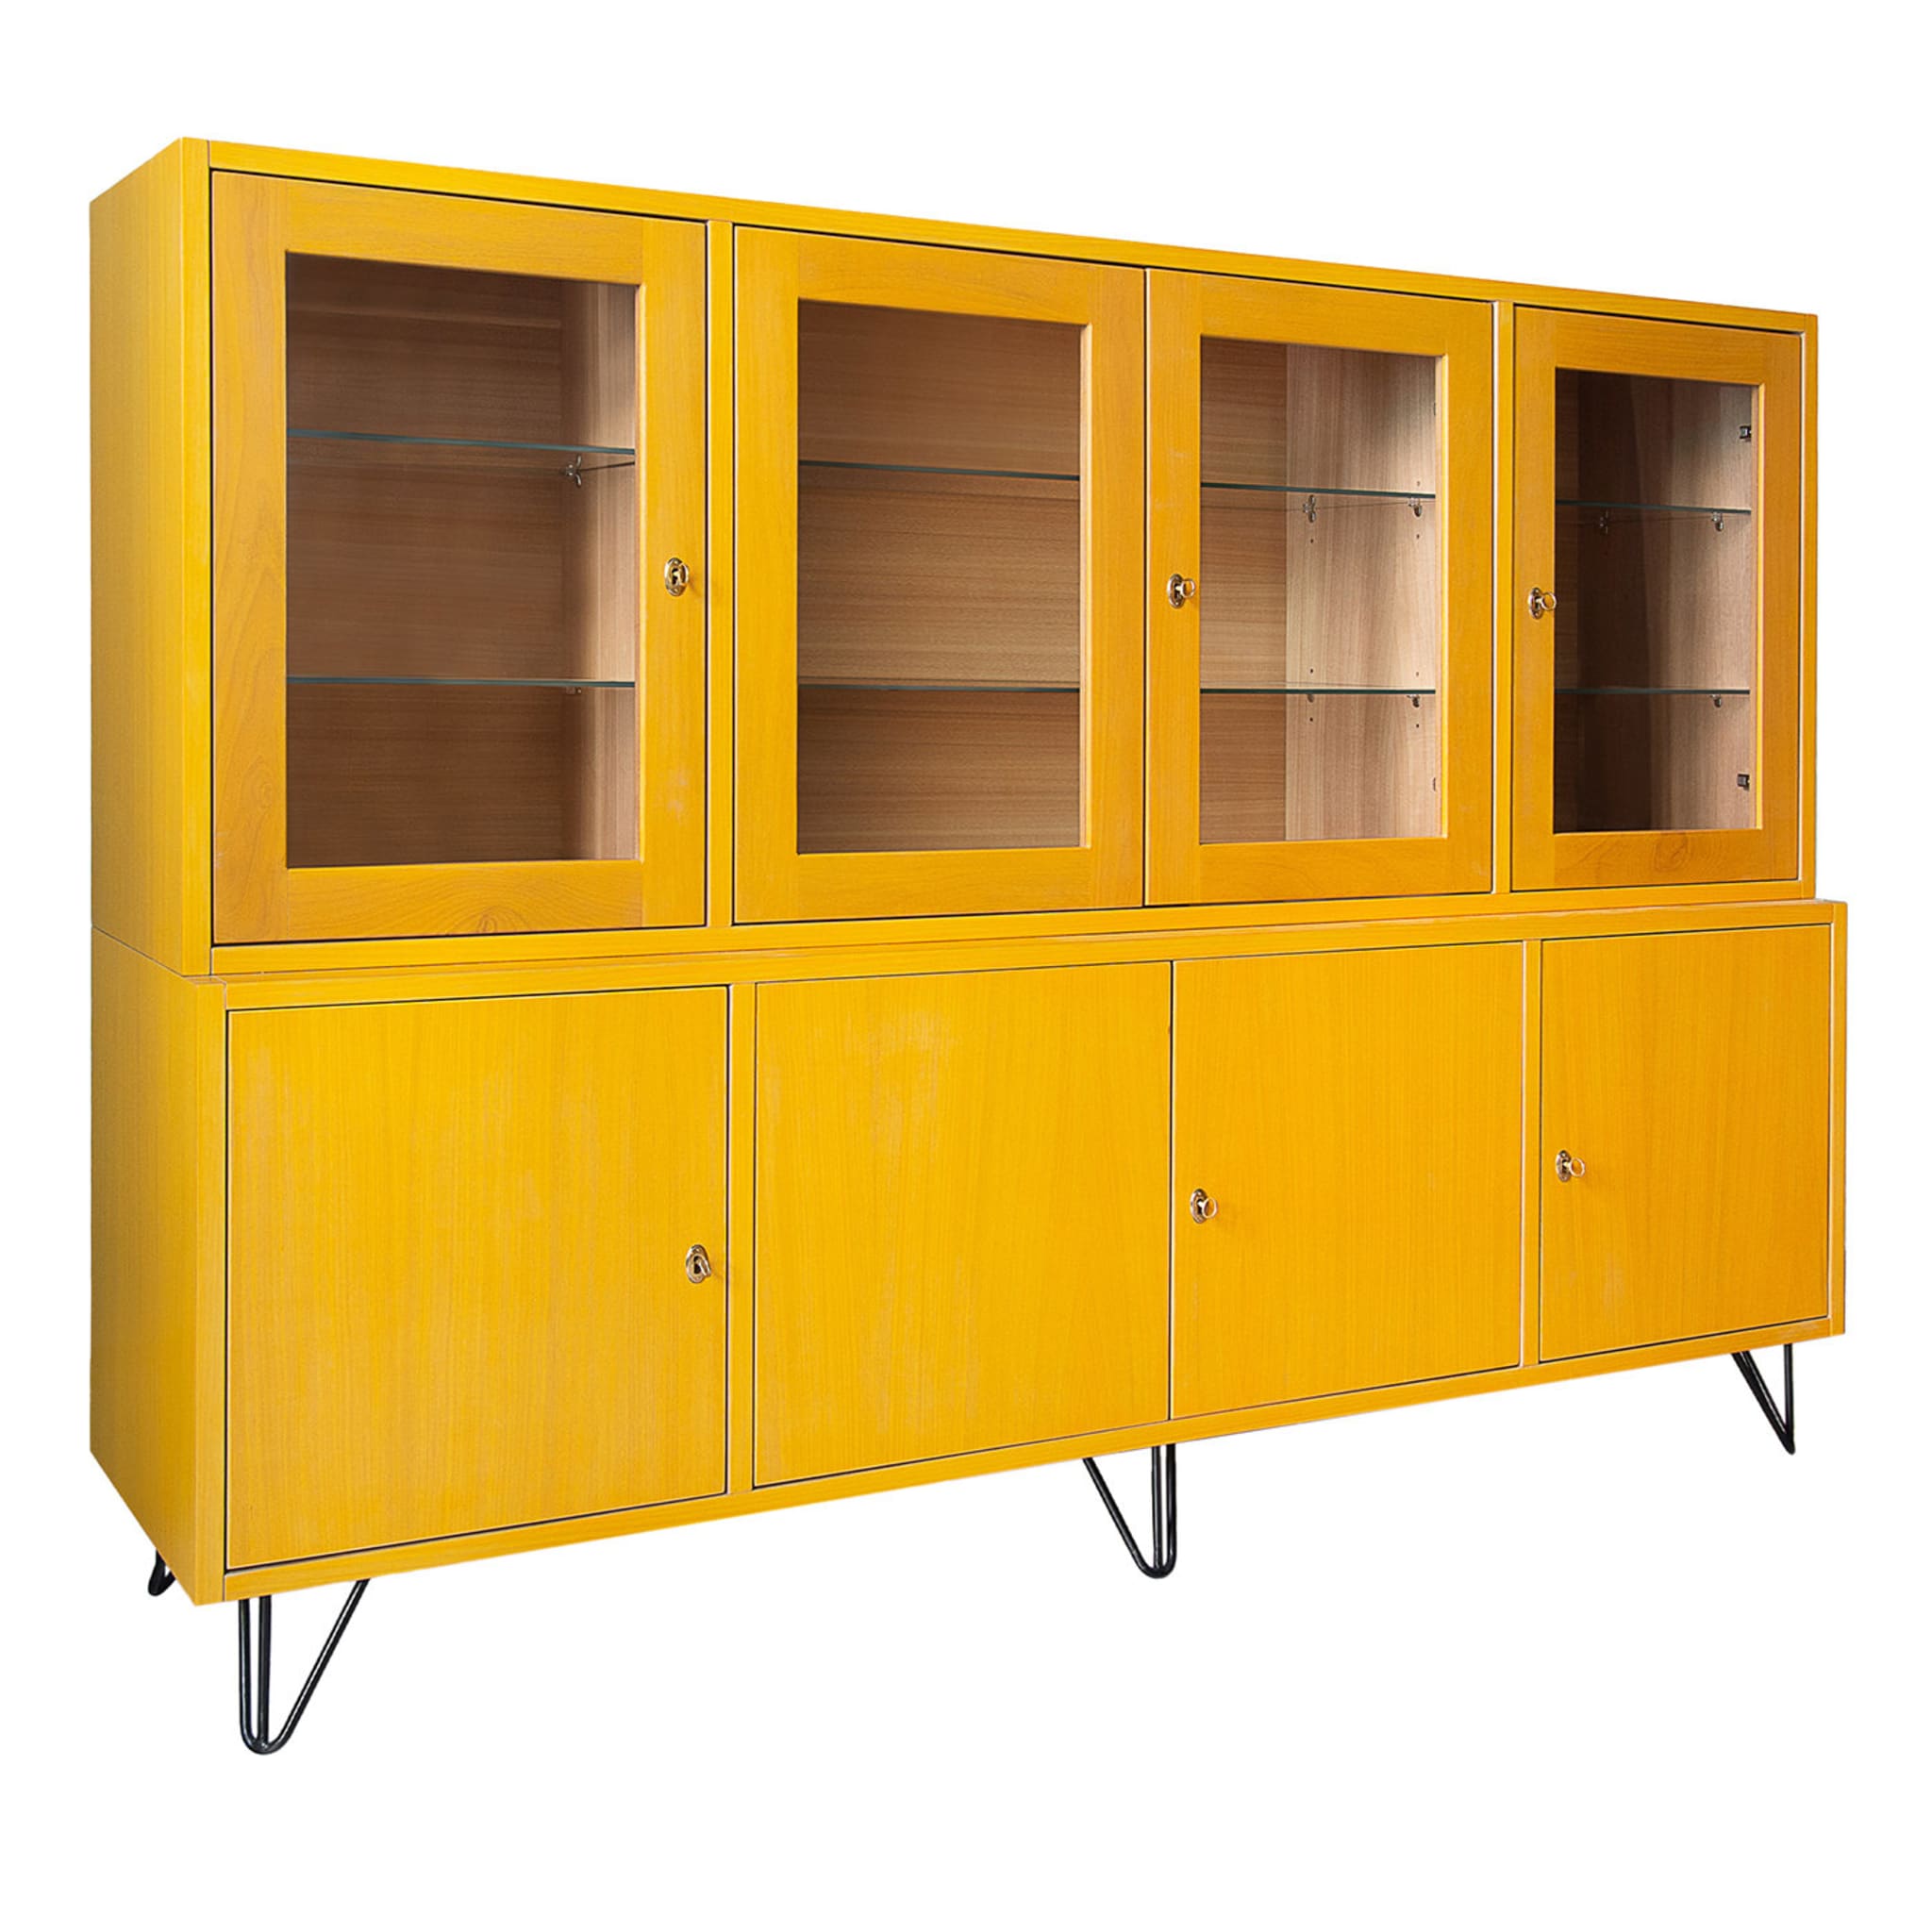 50s-style Yellow Cabinet - Main view